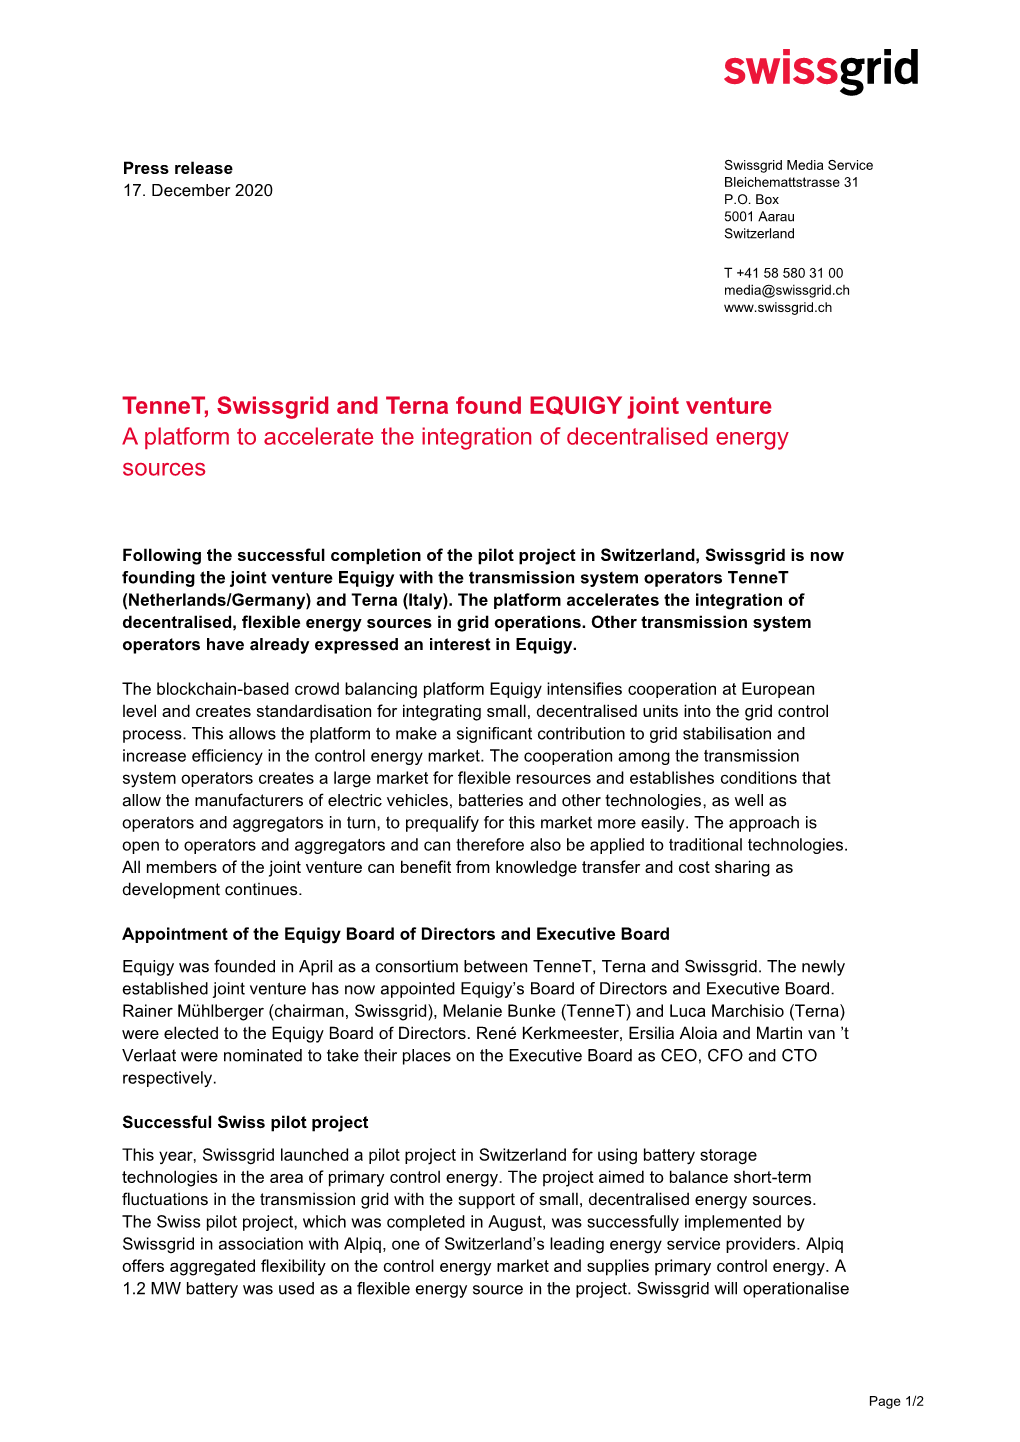 Media Release: Tennet, Swissgrid and Terna Found Equigy Joint Venture